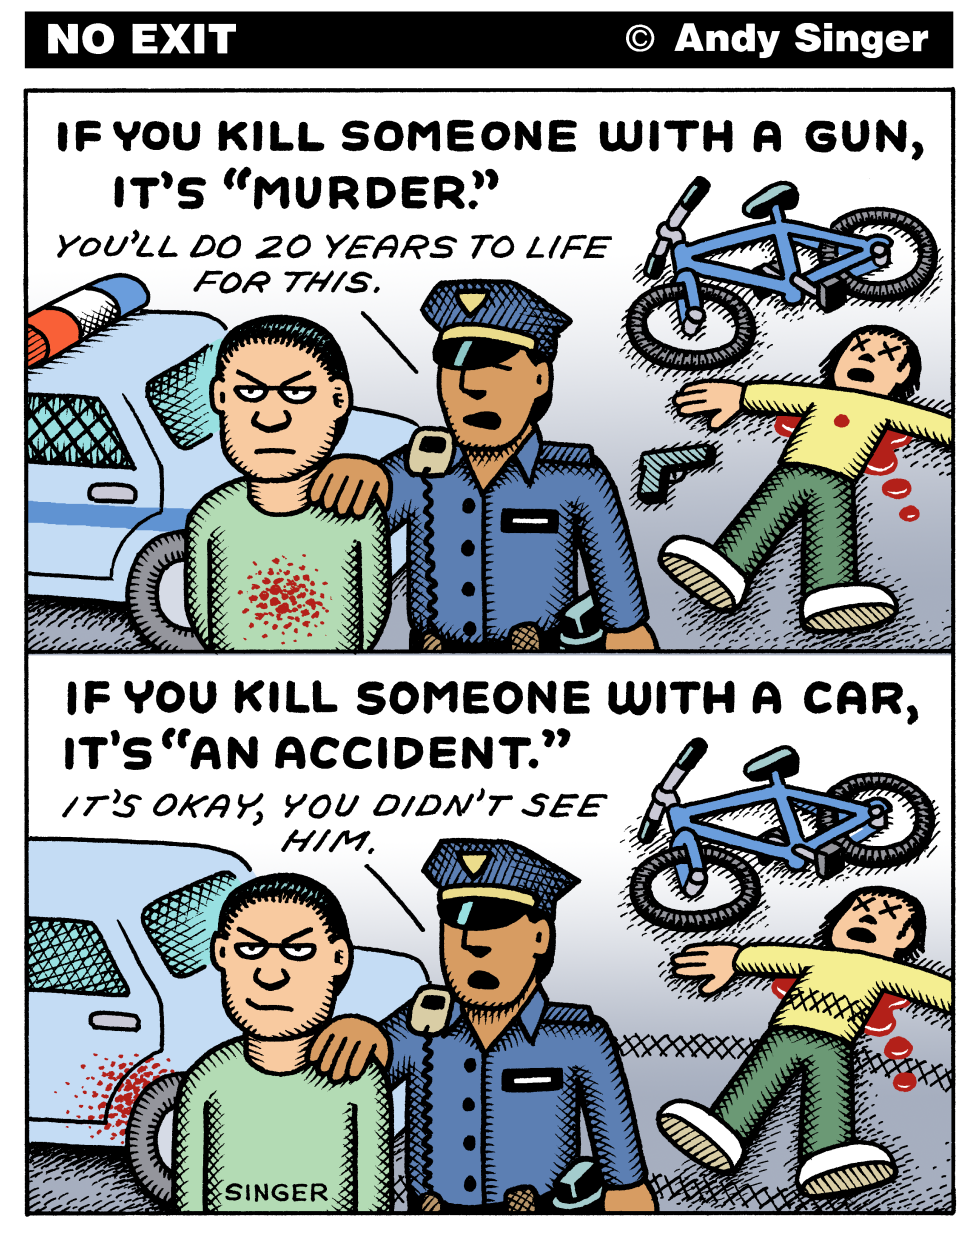 KILLING WITH GUN VERSUS CAR  VERSION by Andy Singer